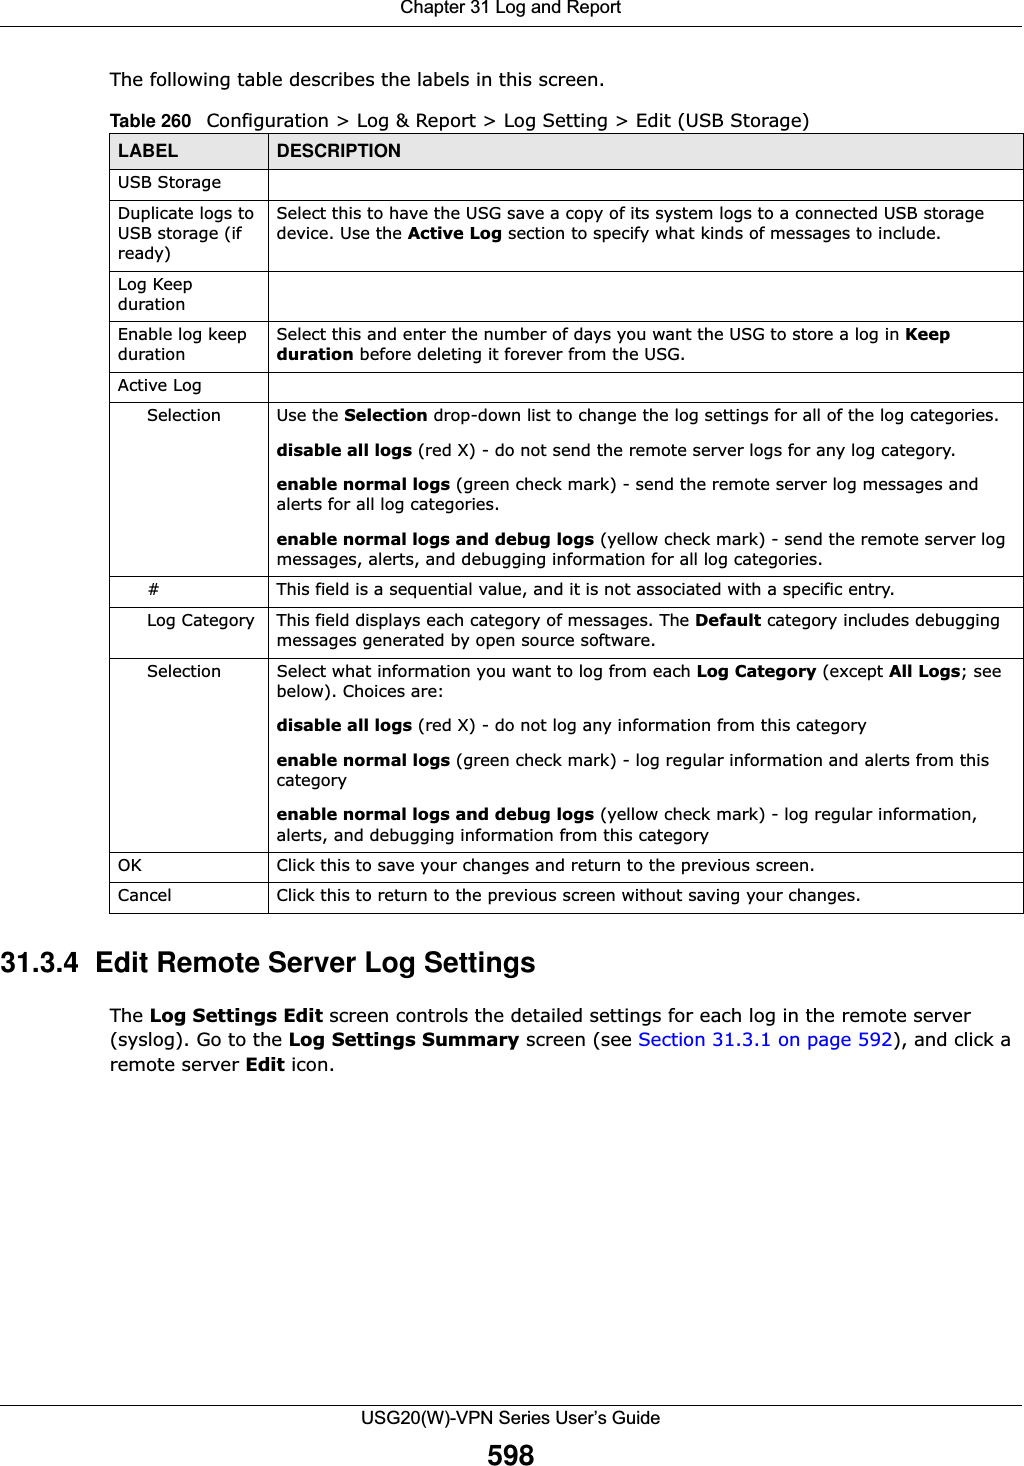 Chapter 31 Log and ReportUSG20(W)-VPN Series User’s Guide598The following table describes the labels in this screen.  31.3.4  Edit Remote Server Log Settings The Log Settings Edit screen controls the detailed settings for each log in the remote server (syslog). Go to the Log Settings Summary screen (see Section 31.3.1 on page 592), and click a remote server Edit icon. Table 260   Configuration &gt; Log &amp; Report &gt; Log Setting &gt; Edit (USB Storage)LABEL DESCRIPTIONUSB StorageDuplicate logs to USB storage (if ready)Select this to have the USG save a copy of its system logs to a connected USB storage device. Use the Active Log section to specify what kinds of messages to include.Log Keep durationEnable log keep durationSelect this and enter the number of days you want the USG to store a log in Keep duration before deleting it forever from the USG.Active LogSelection Use the Selection drop-down list to change the log settings for all of the log categories.disable all logs (red X) - do not send the remote server logs for any log category.enable normal logs (green check mark) - send the remote server log messages and alerts for all log categories. enable normal logs and debug logs (yellow check mark) - send the remote server log messages, alerts, and debugging information for all log categories. # This field is a sequential value, and it is not associated with a specific entry.Log Category This field displays each category of messages. The Default category includes debugging messages generated by open source software.Selection Select what information you want to log from each Log Category (except All Logs; see below). Choices are:disable all logs (red X) - do not log any information from this categoryenable normal logs (green check mark) - log regular information and alerts from this categoryenable normal logs and debug logs (yellow check mark) - log regular information, alerts, and debugging information from this categoryOK Click this to save your changes and return to the previous screen.Cancel Click this to return to the previous screen without saving your changes.